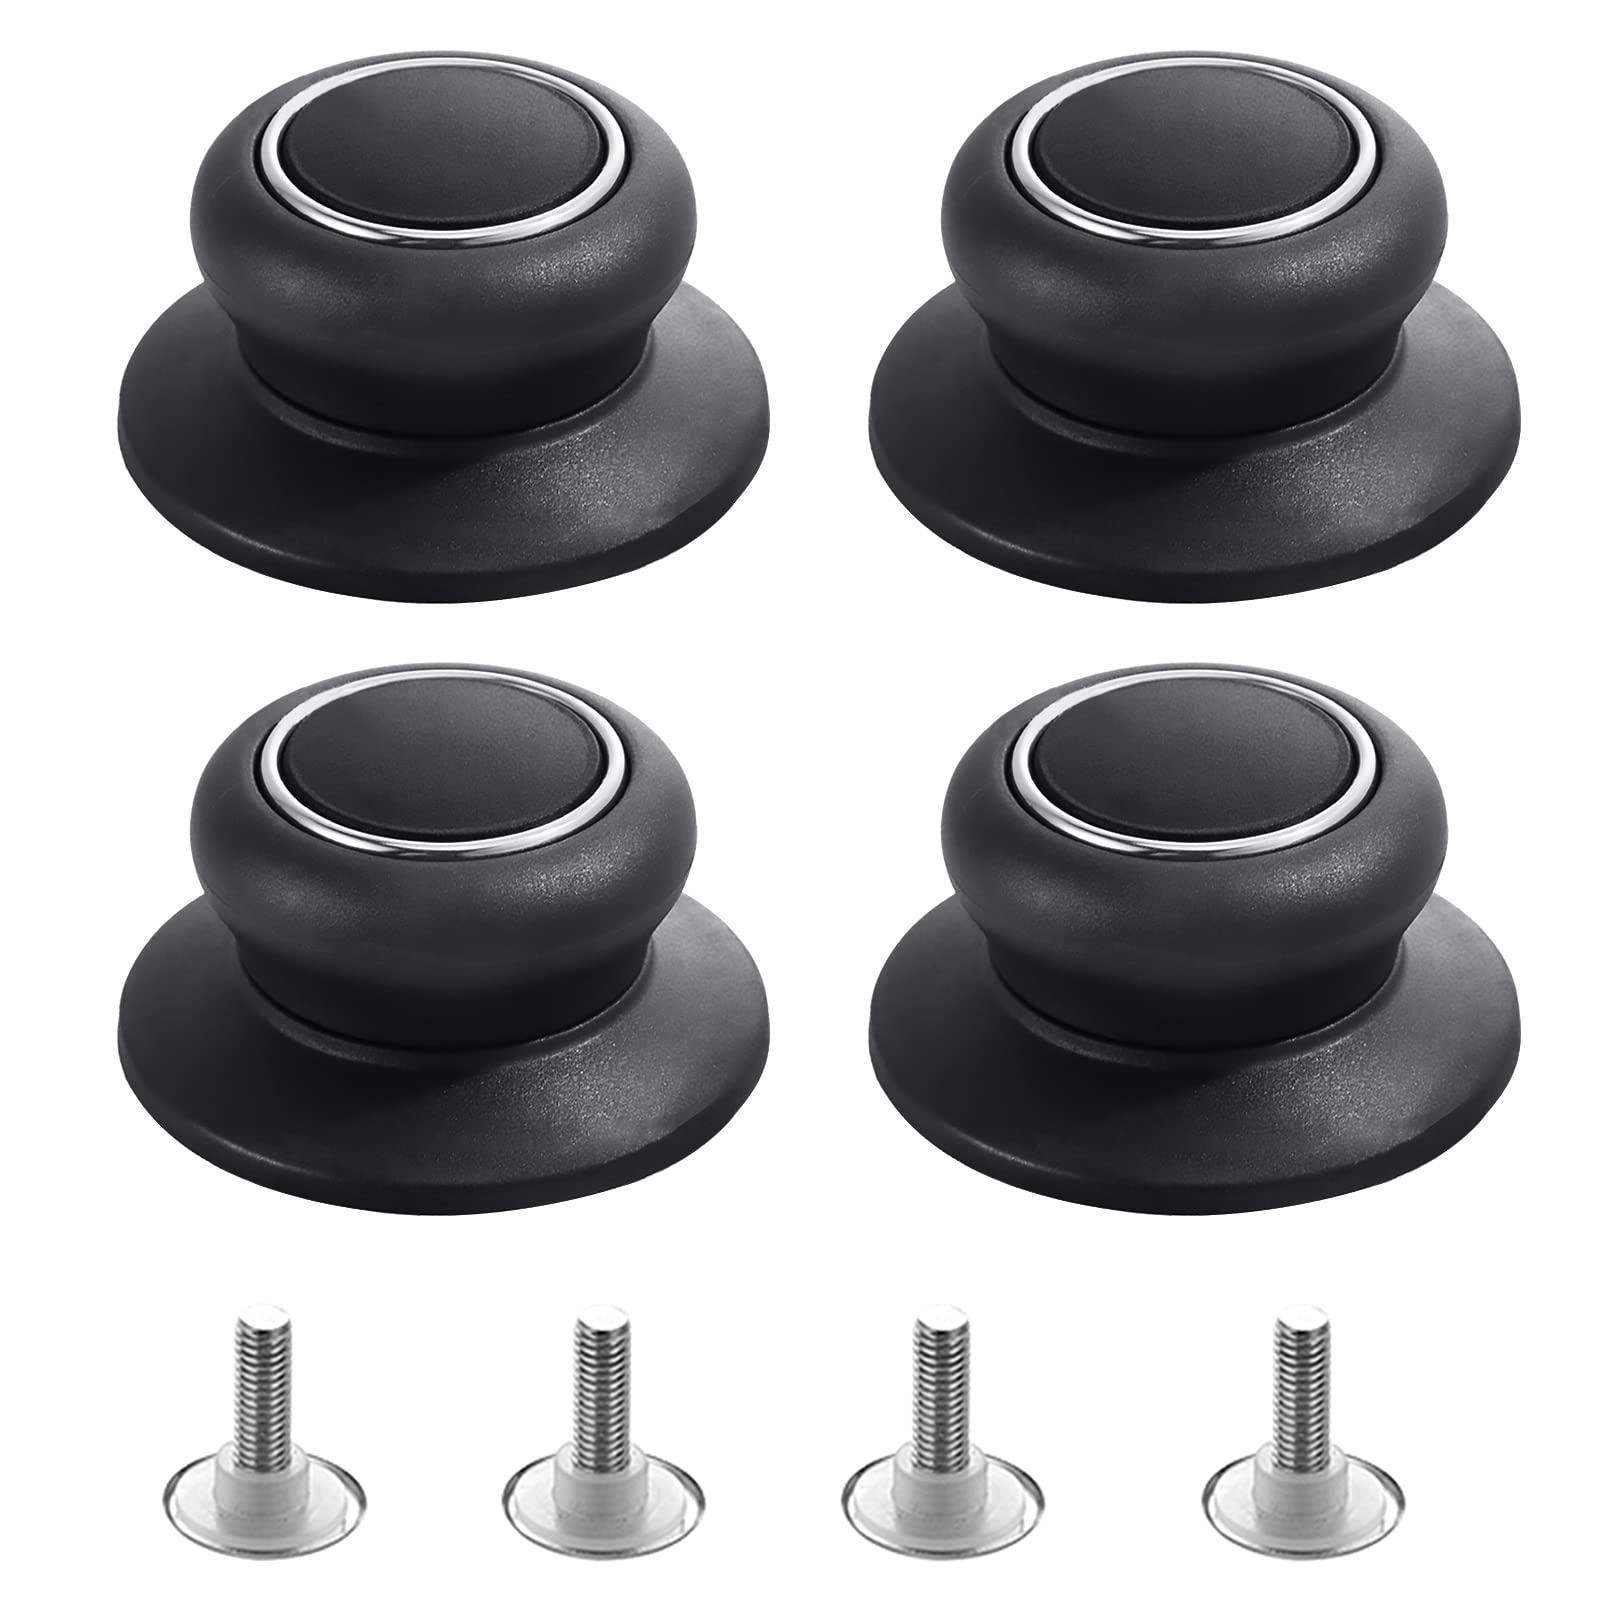 4Pcs Universal Pot Lid Top Replacement Knob,Heat Resistant and Prevent static electricity,Easy installation Kitchen Cookware Replacement Pan Lid Holding Handles. (Black) - CookCave